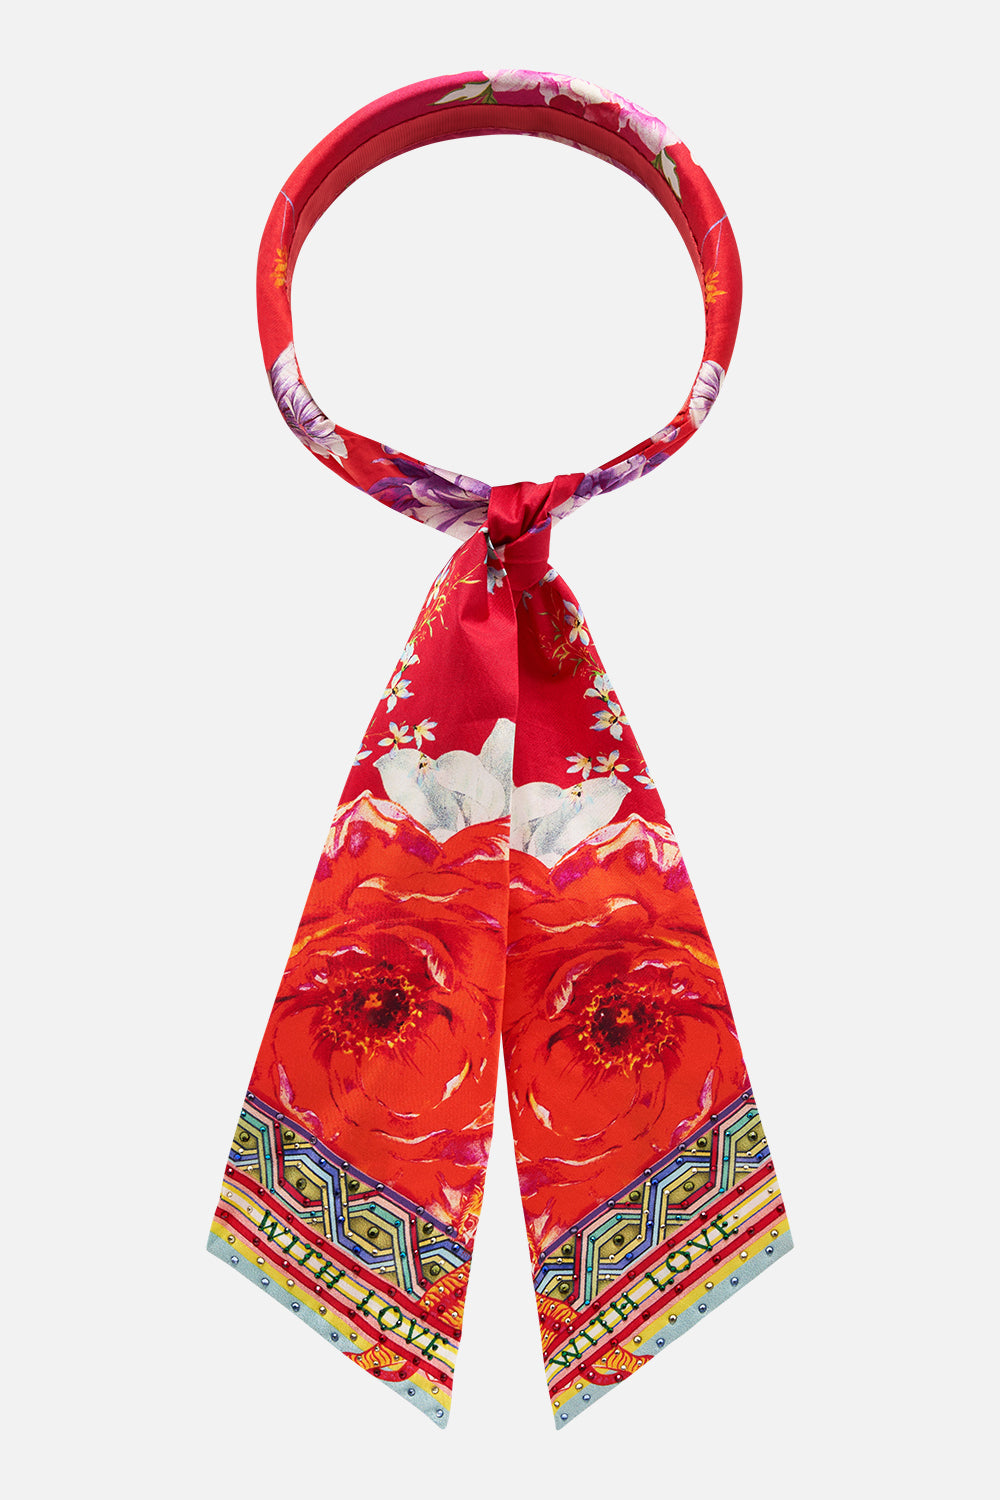 Product view of CAMILLA silk floral scarf headband in Kiss and Tell print